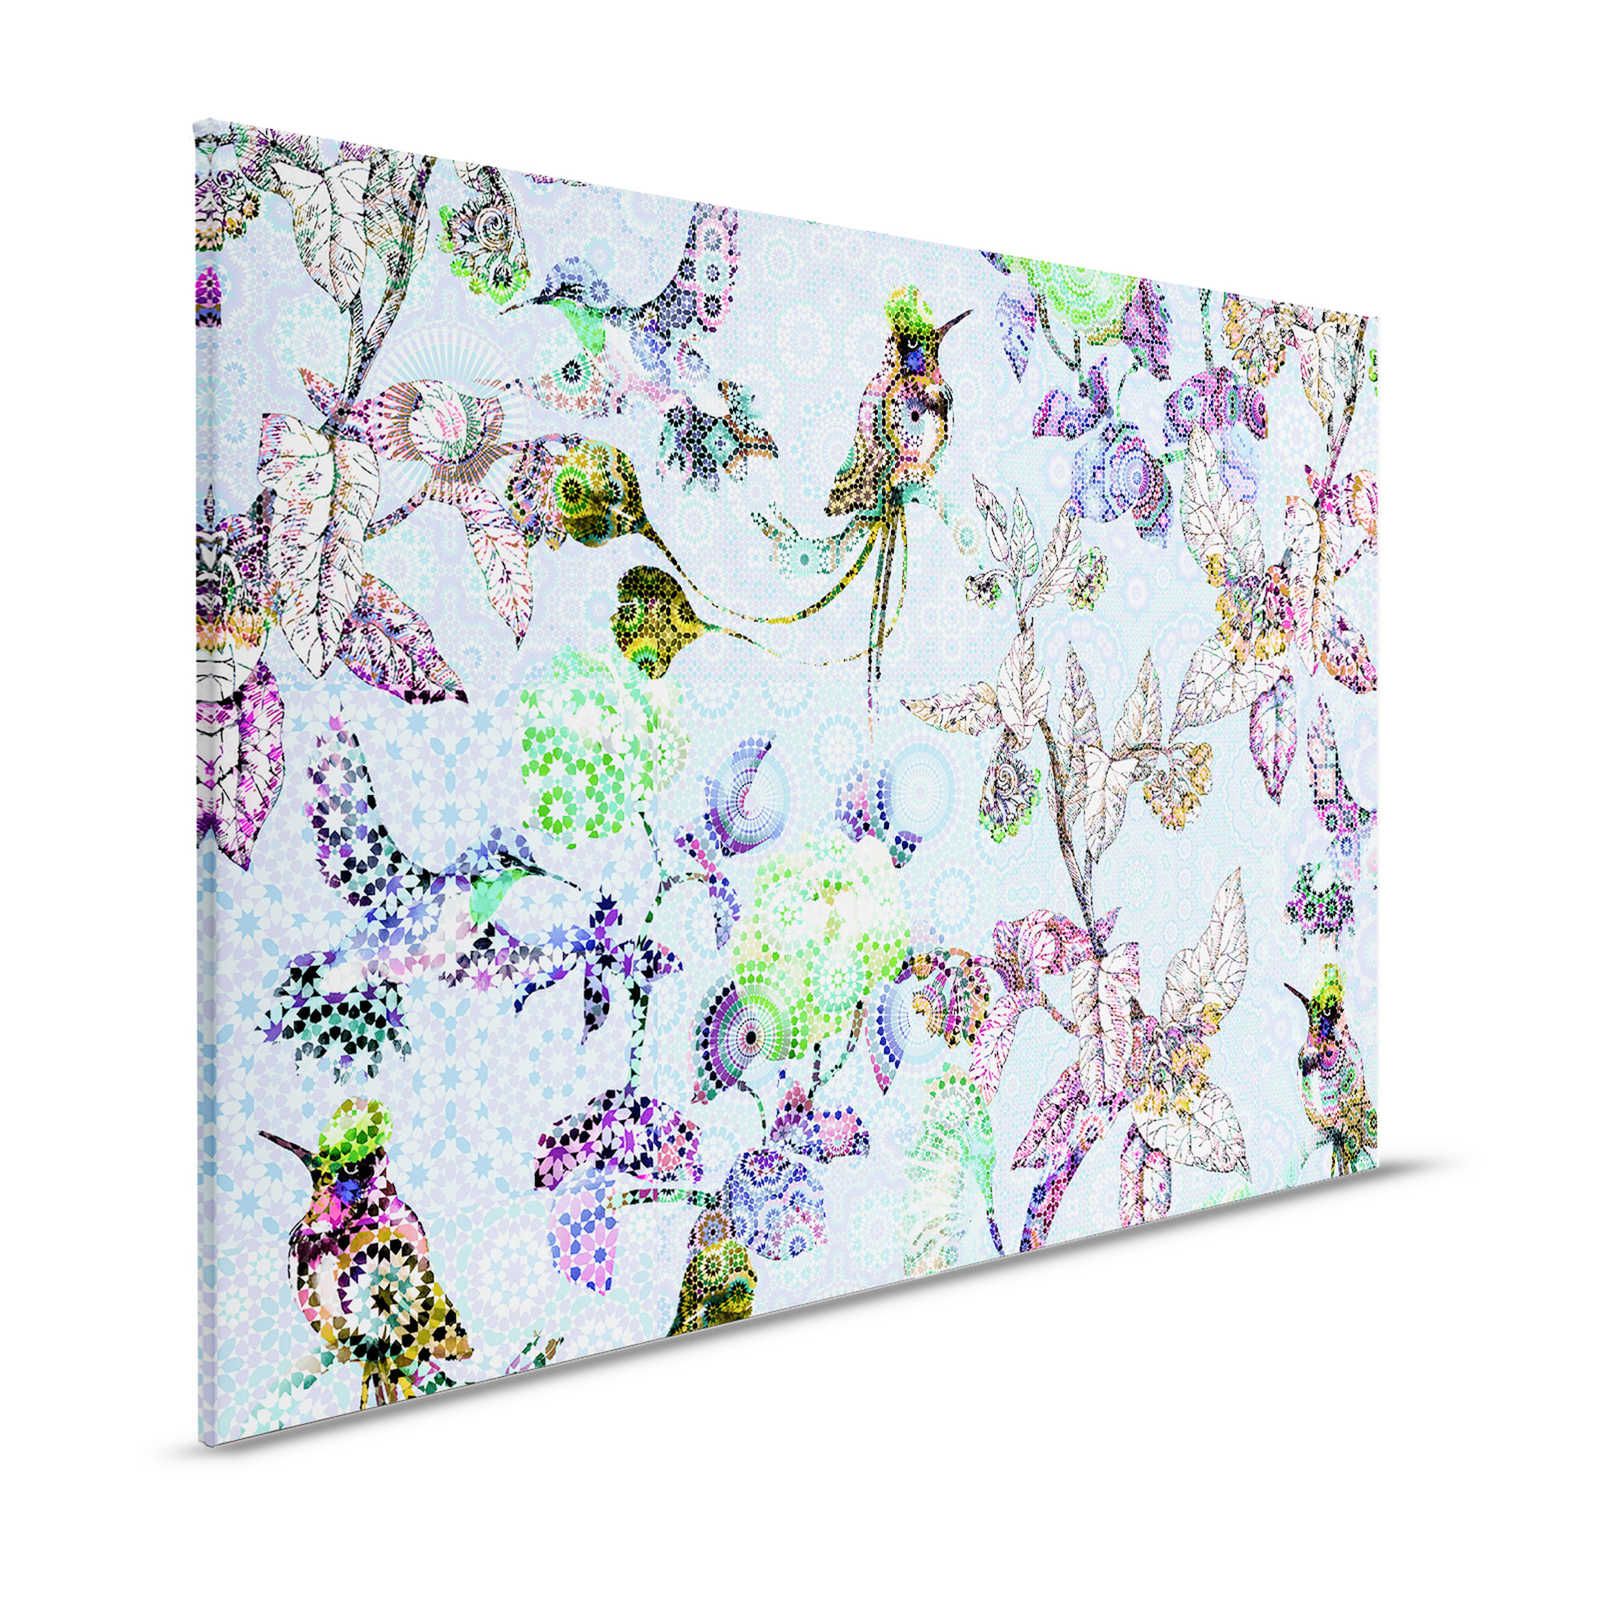 Canvas painting Flowers & Birds in Mosaic Style - 1.20 m x 0.80 m
